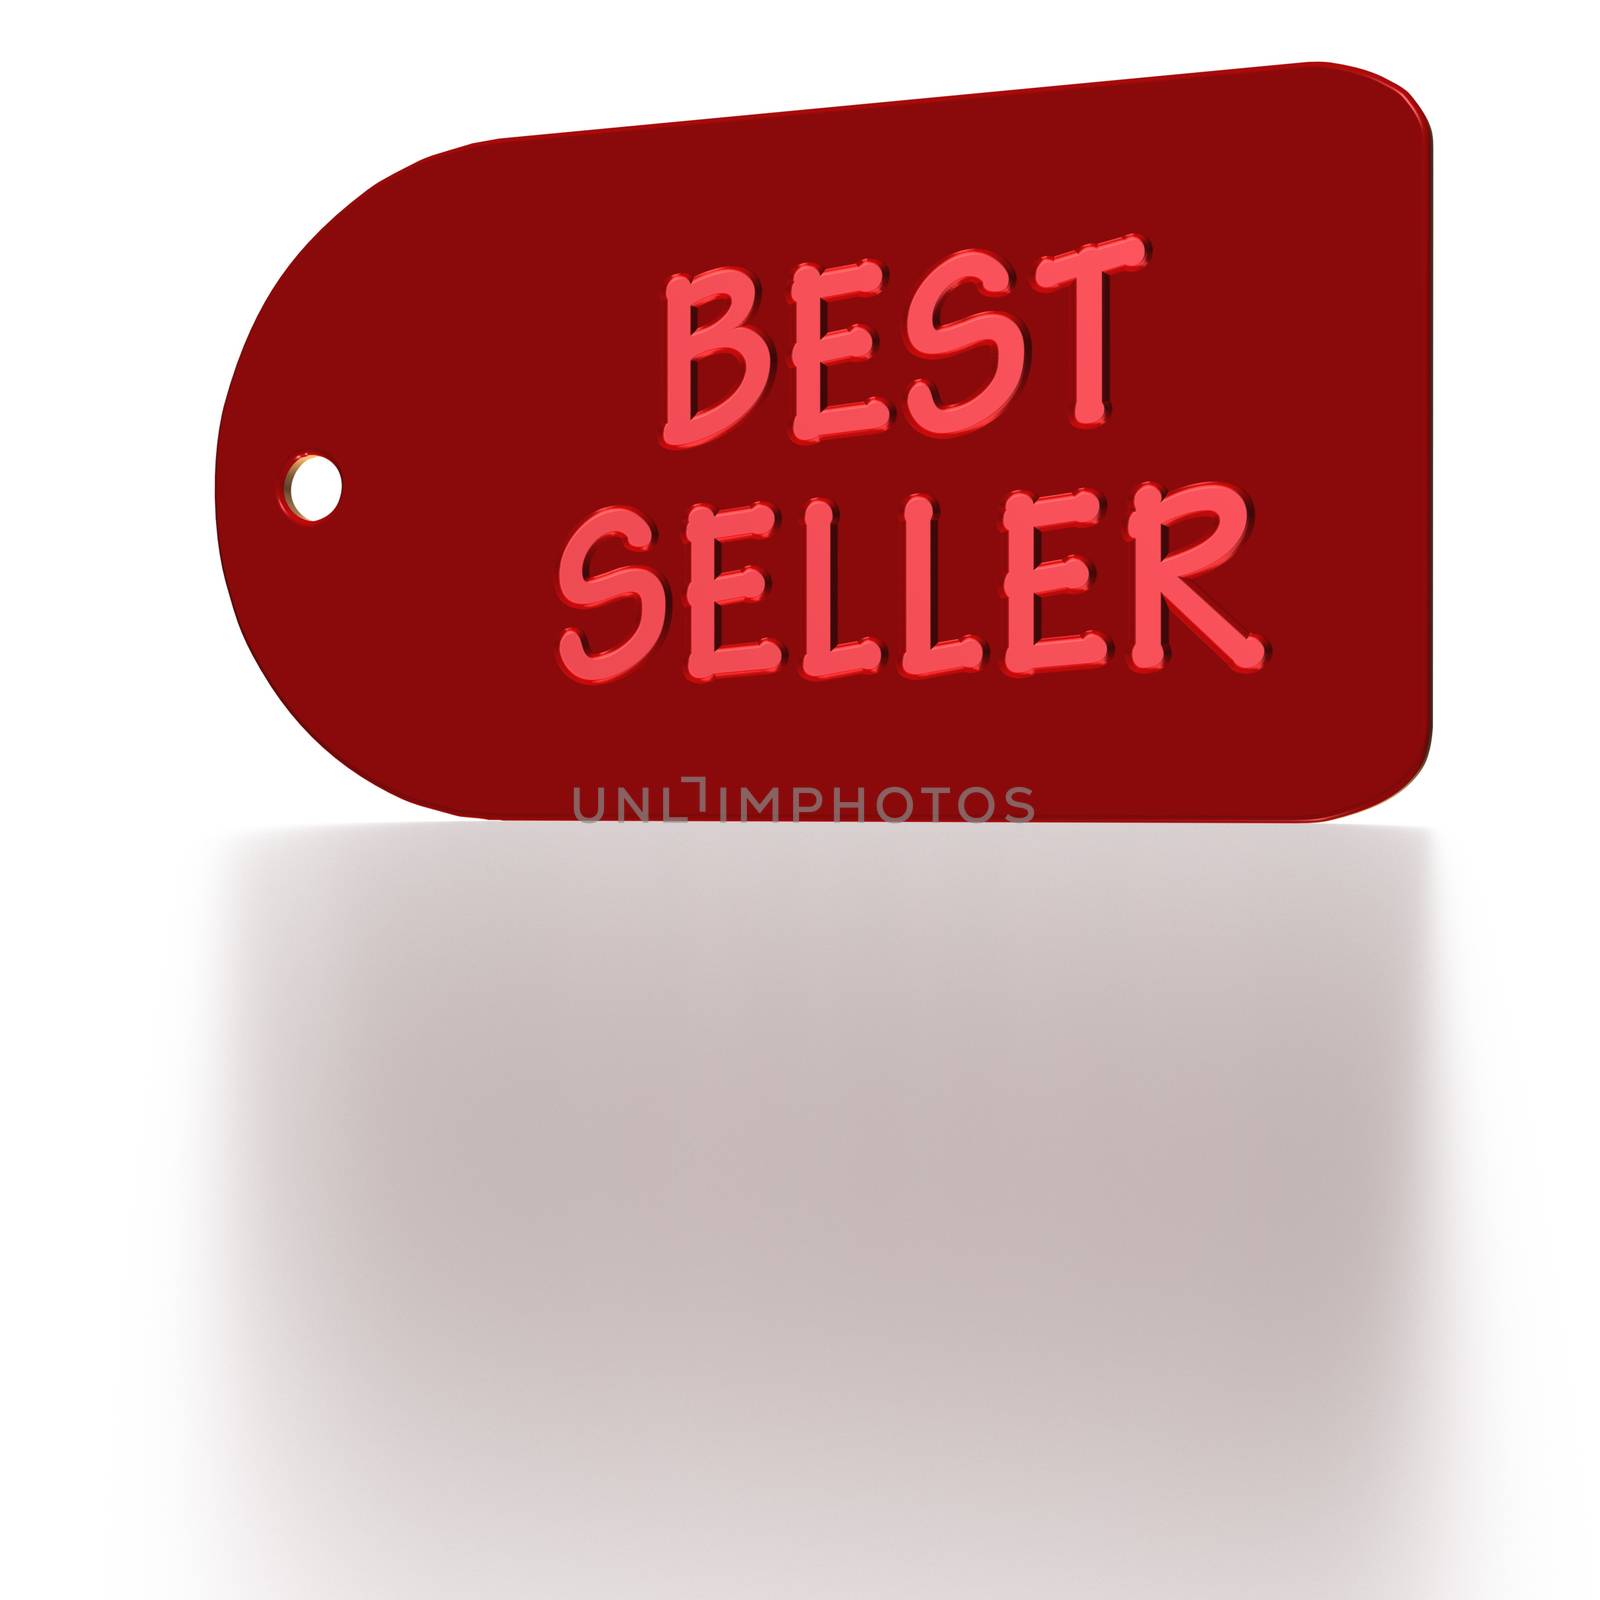 High Quality Best seller product badge isolated on white.